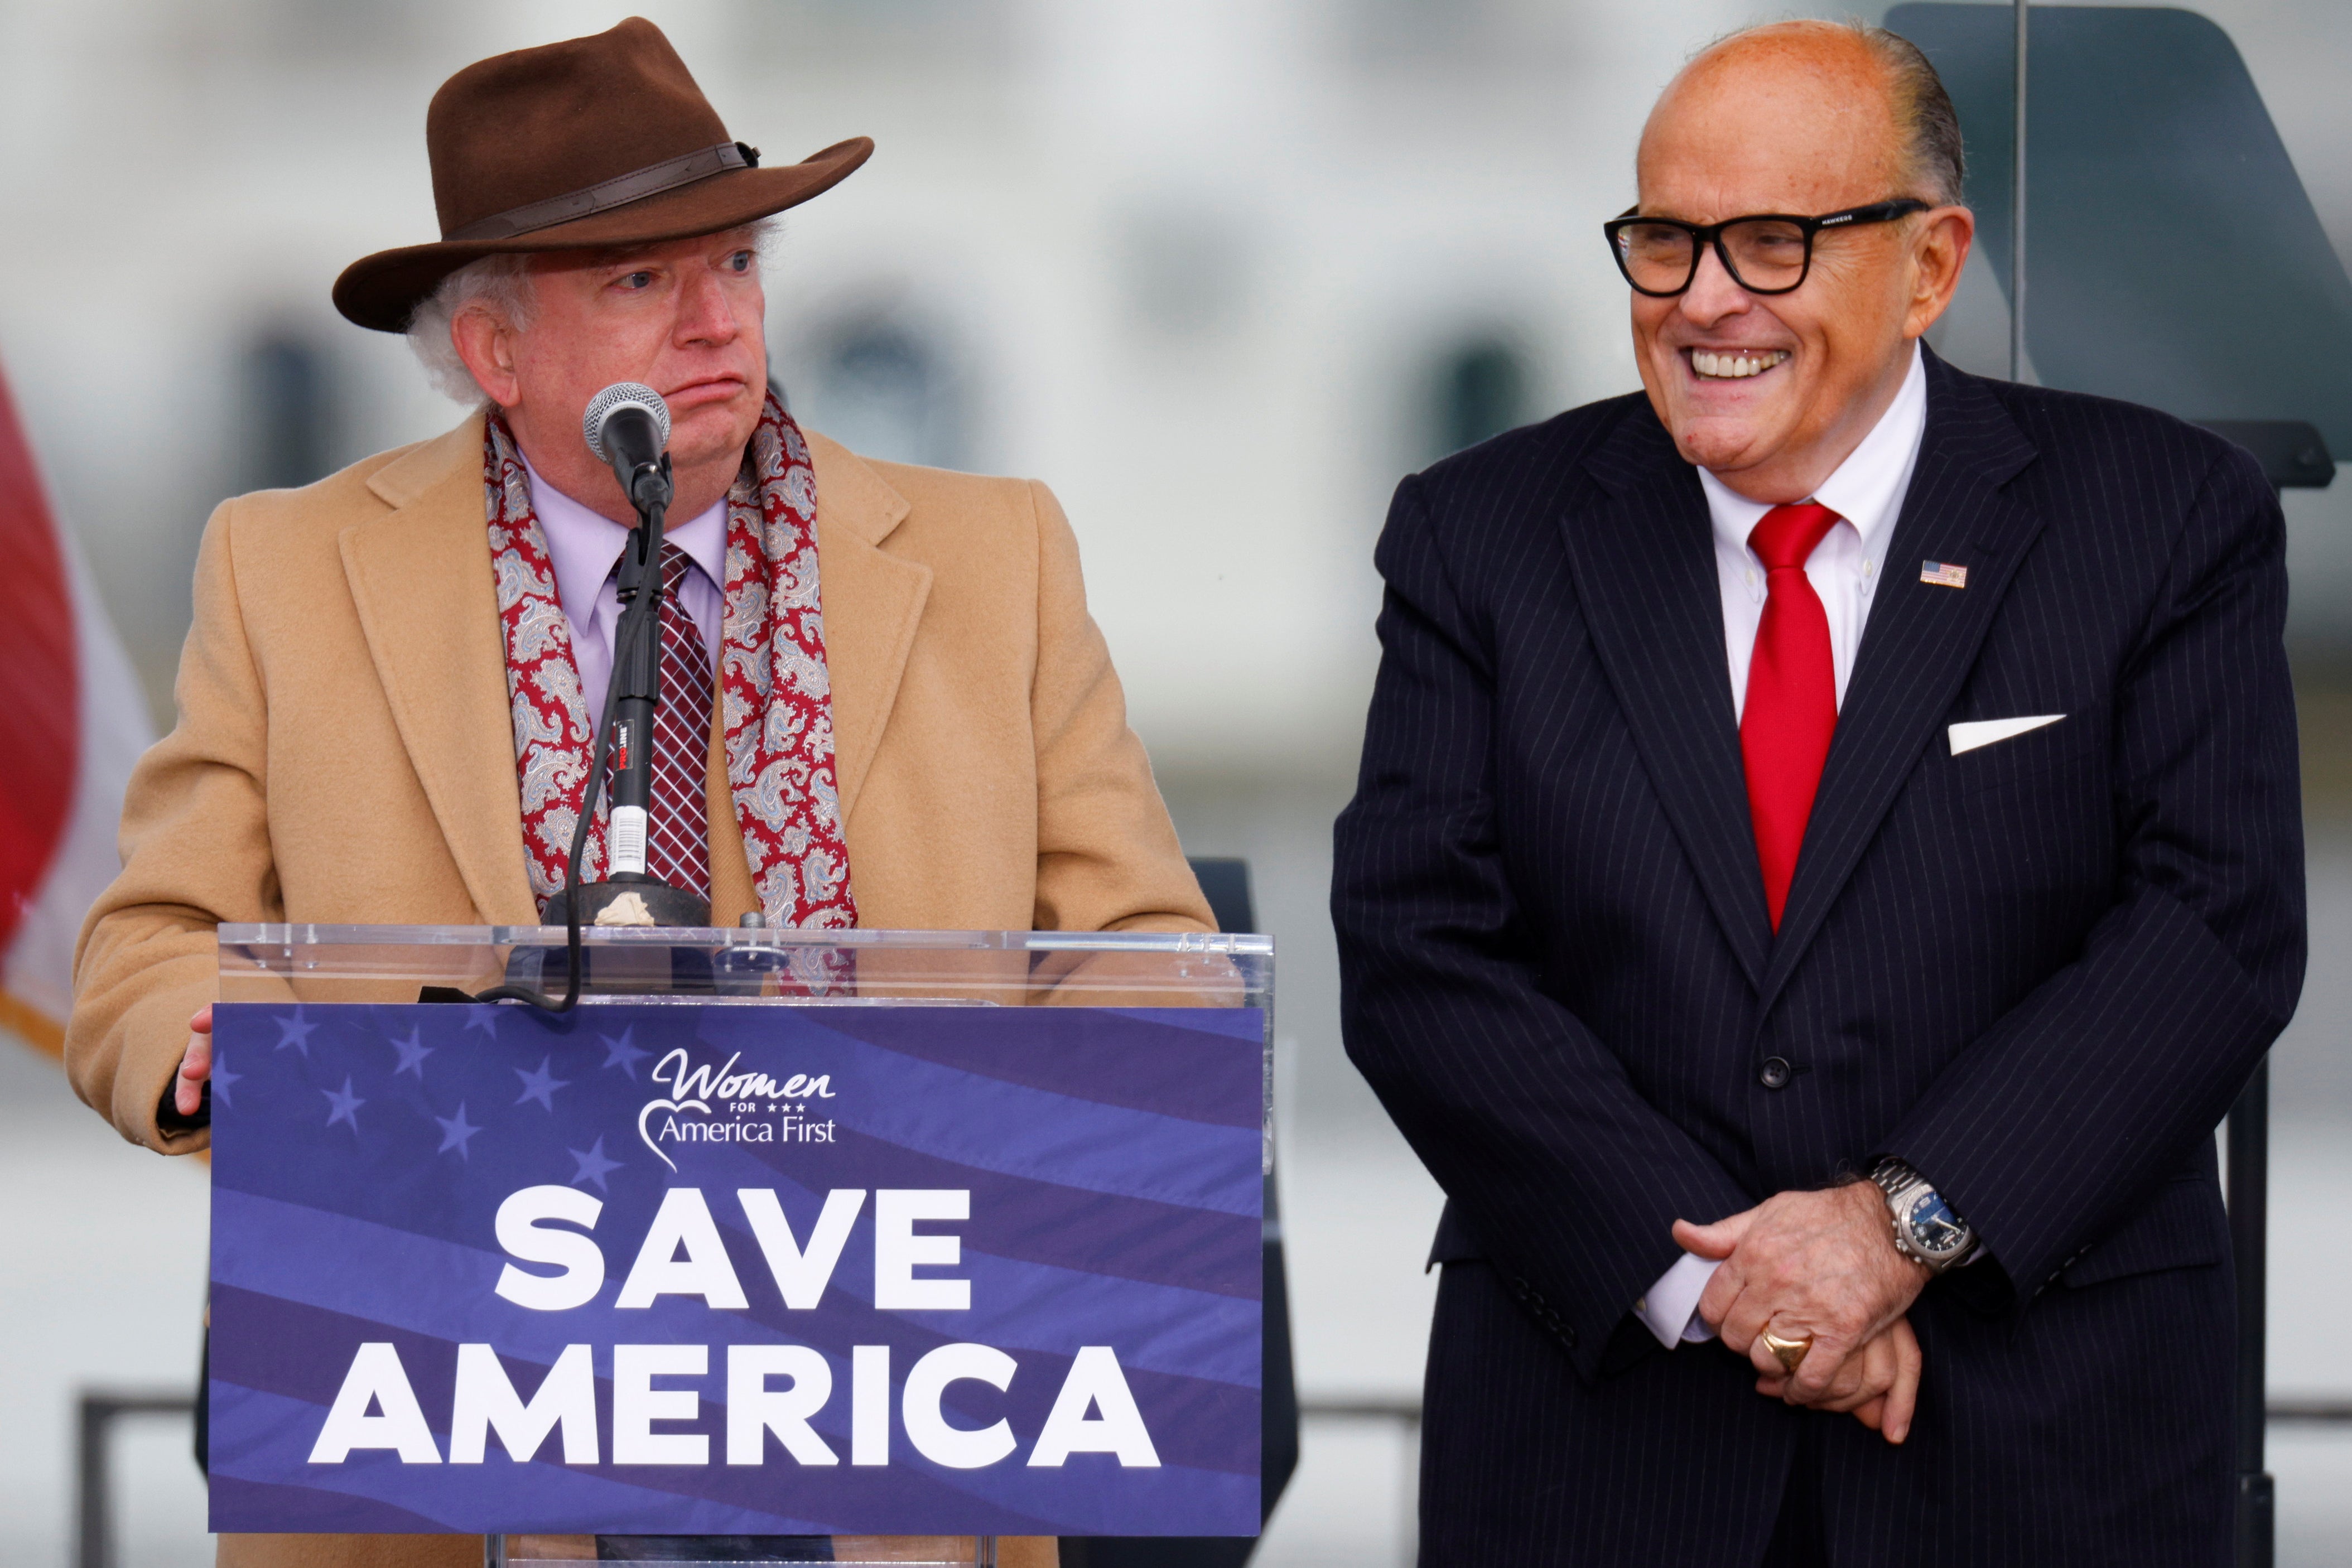 Eastman wears a dumb-looking hat and coat and scowls, Giuliani wears a dumb-looking grin.